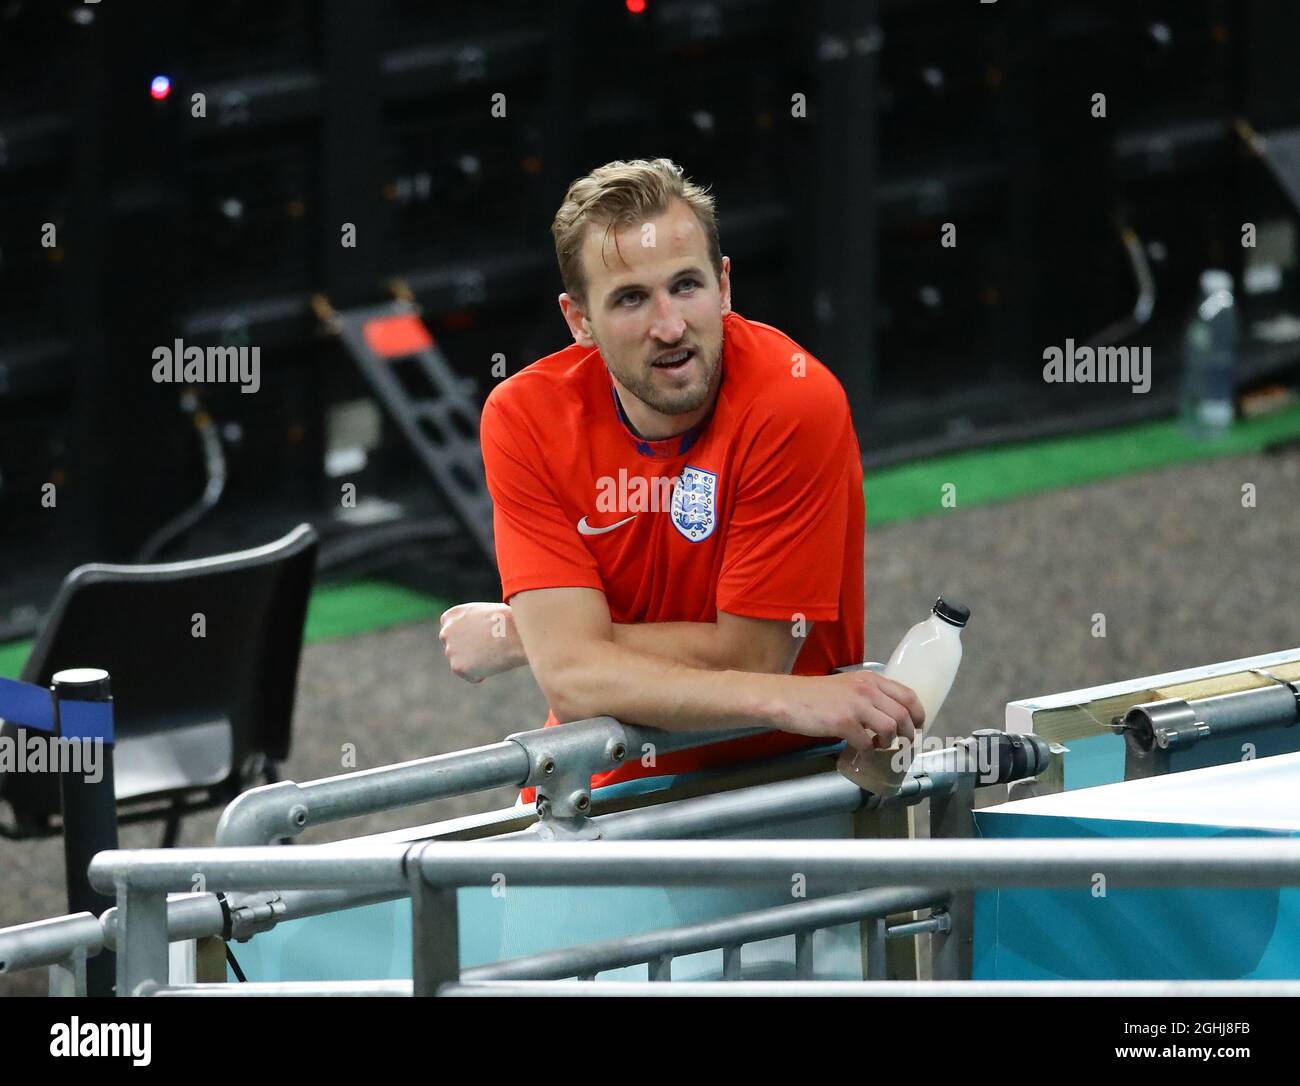 London, England, 22nd June 2021. Harry Kane of England chats to family members at the end of the game during the UEFA European Championships match at Wembley Stadium, London. Picture credit should read: David Klein / Sportimage via PA Images Stock Photo